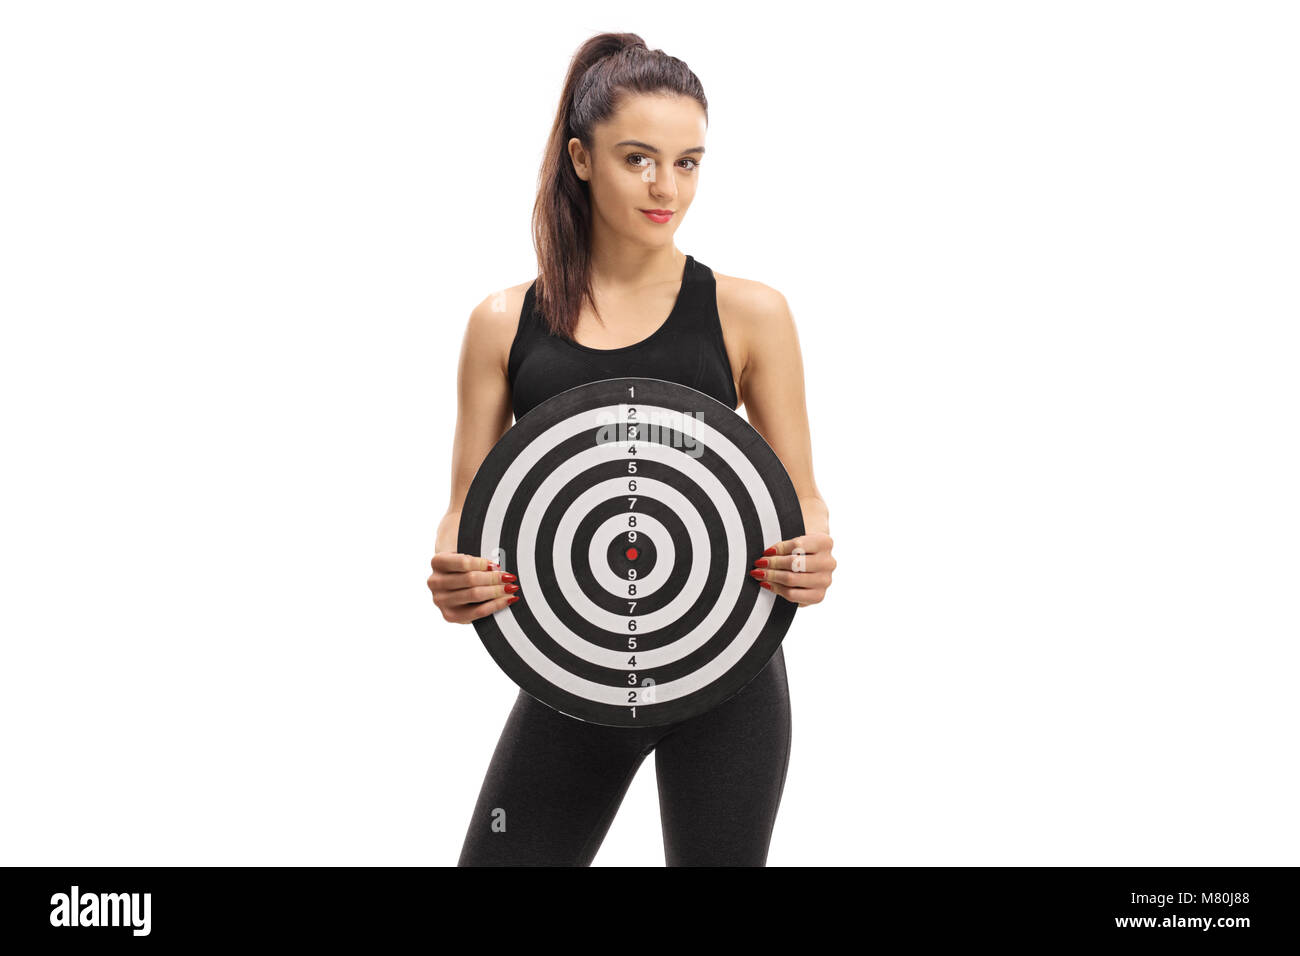 Fitness woman holding a target isolated on white background Stock Photo